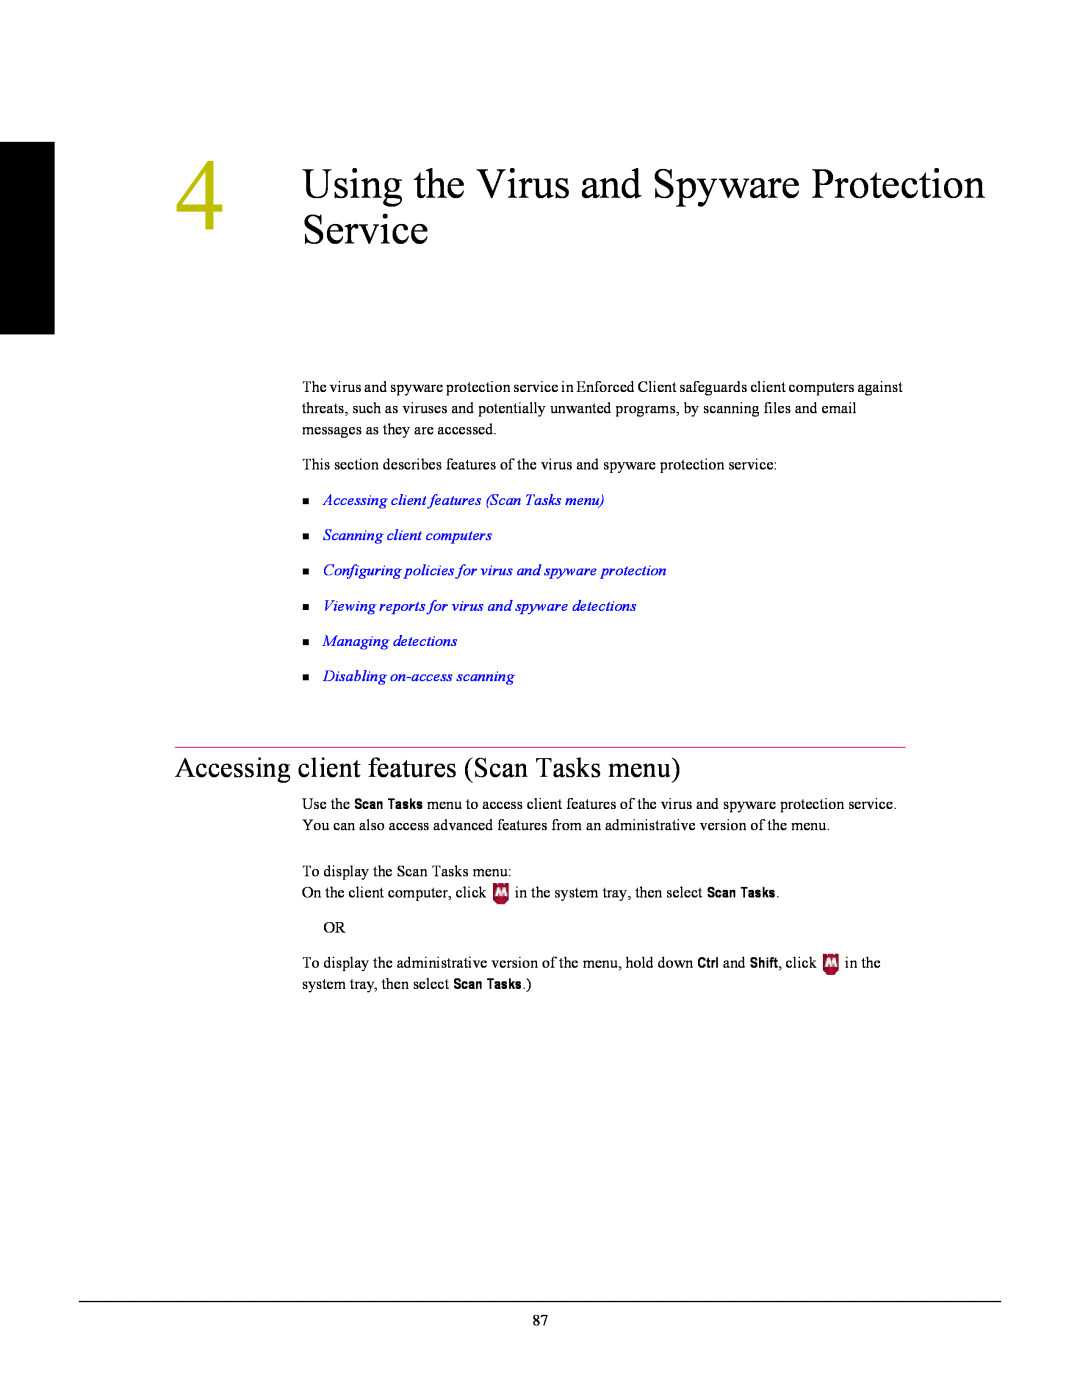 SonicWALL 4.5 manual Using the Virus and Spyware Protection, Service, Accessing client features Scan Tasks menu 